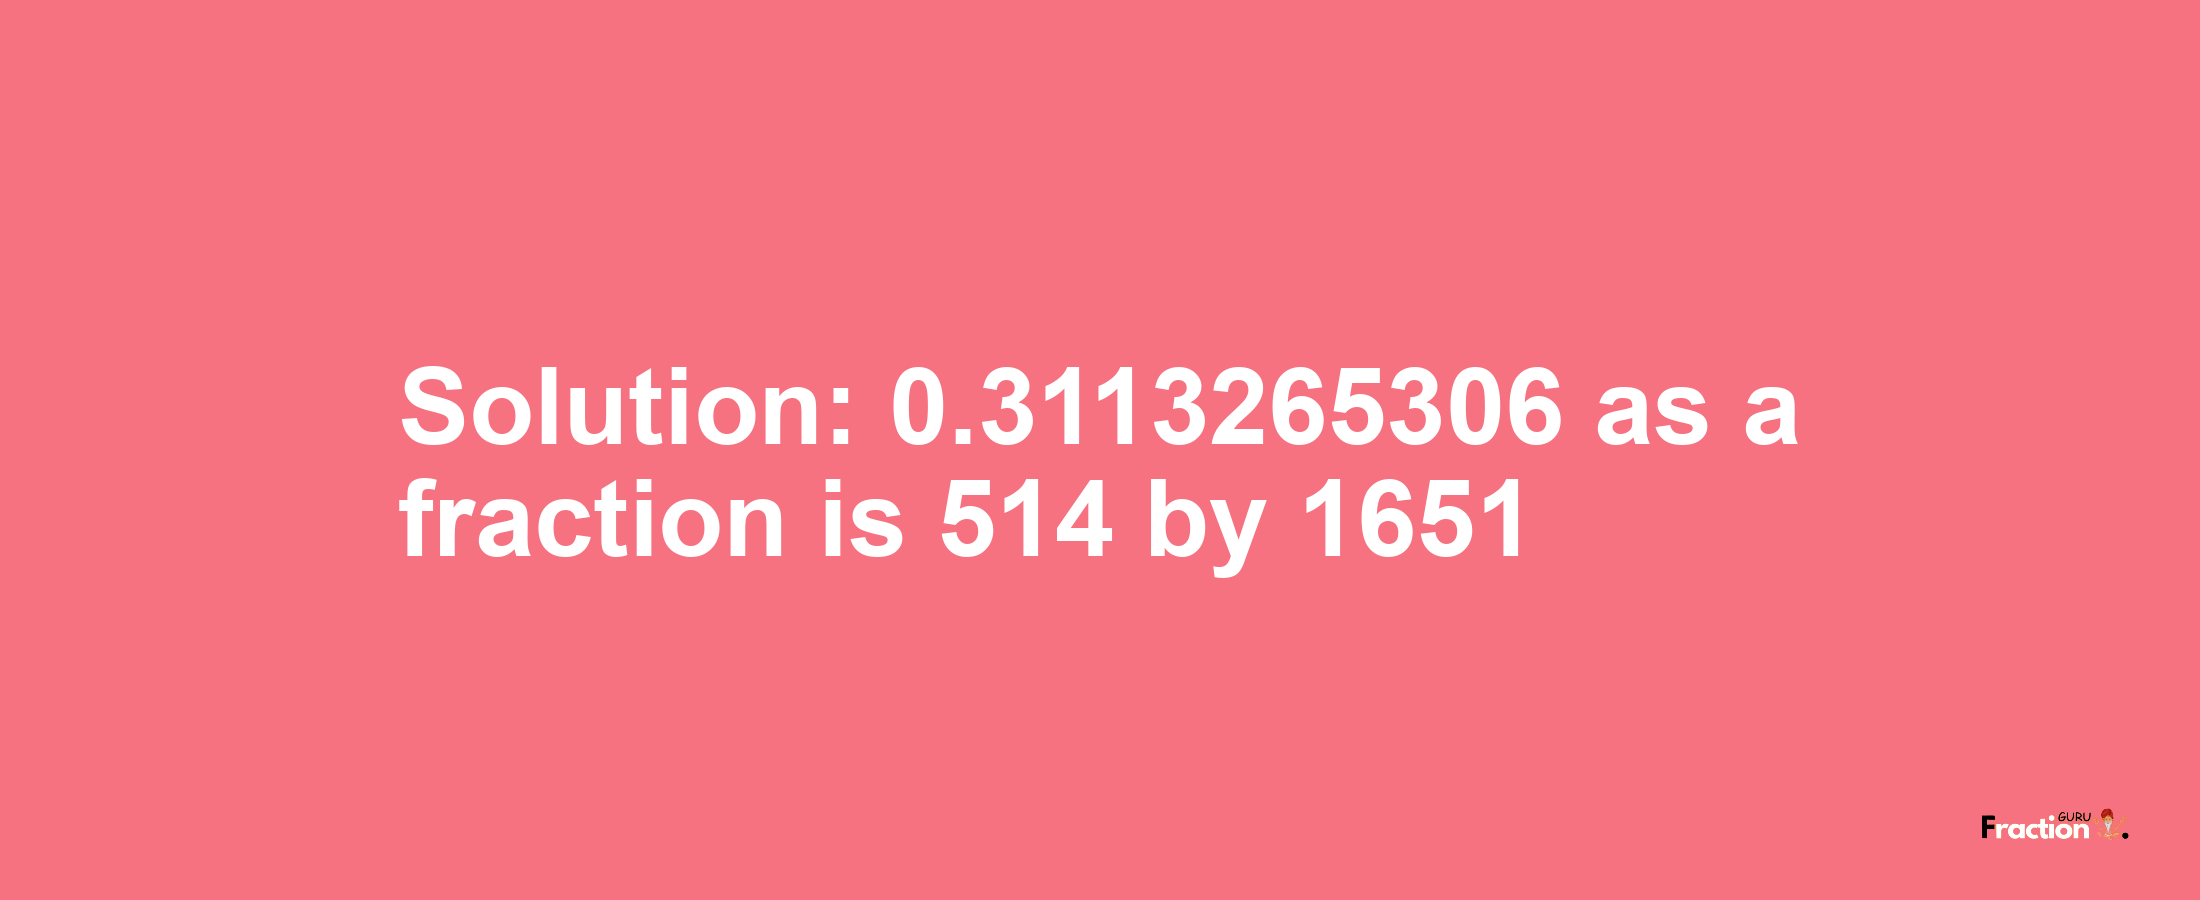 Solution:0.3113265306 as a fraction is 514/1651